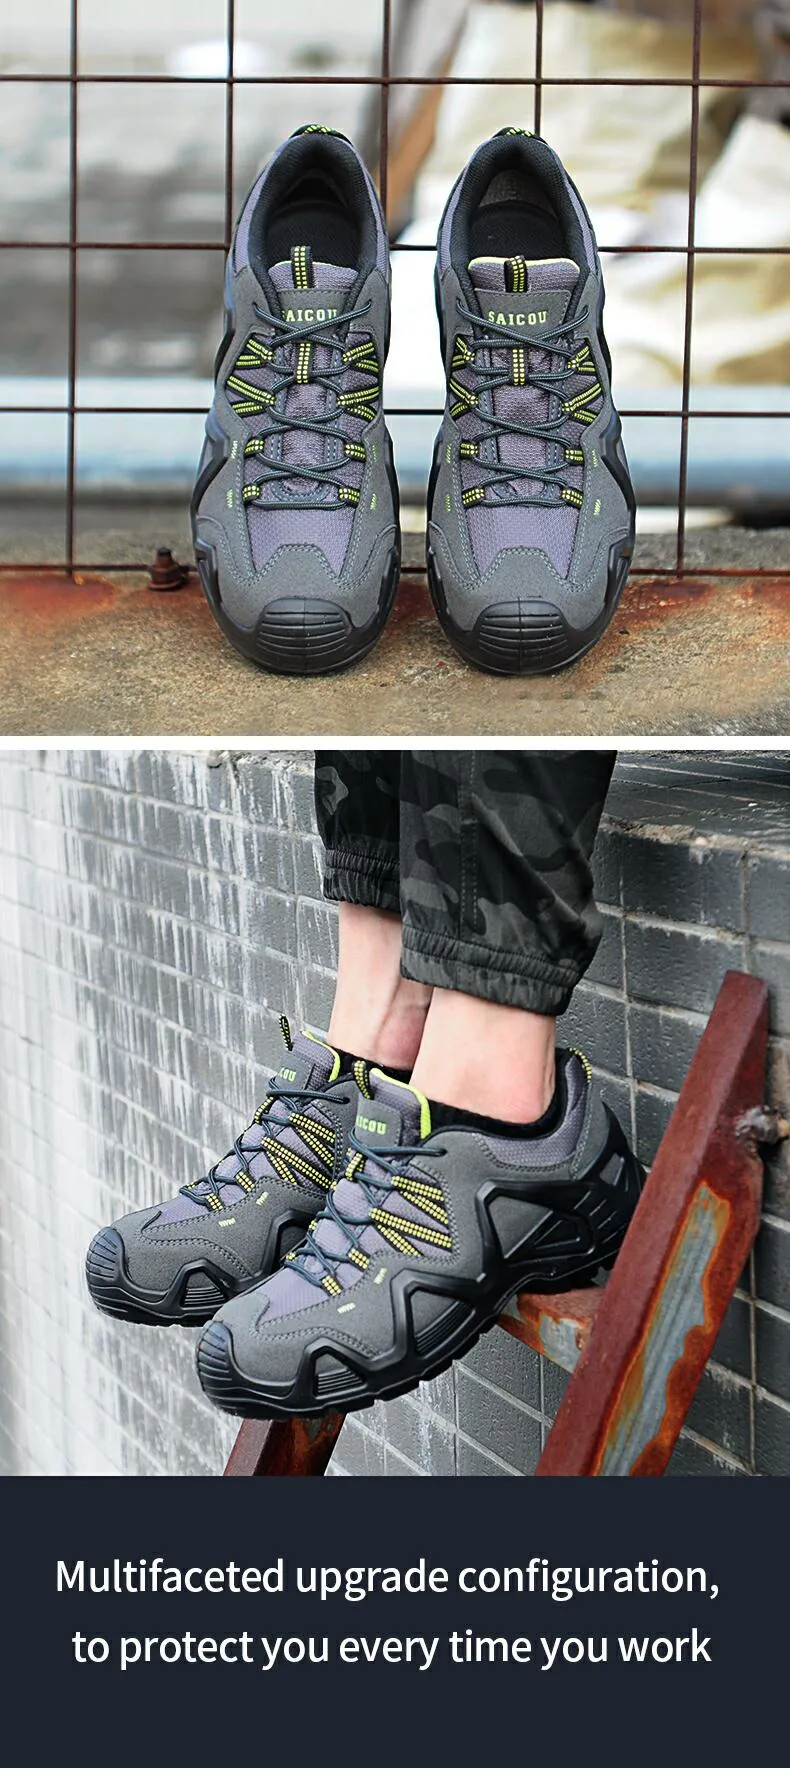 Top Selling High Quality Desma PU Injection Outdoor Hiking Shoes and Safety Shoes